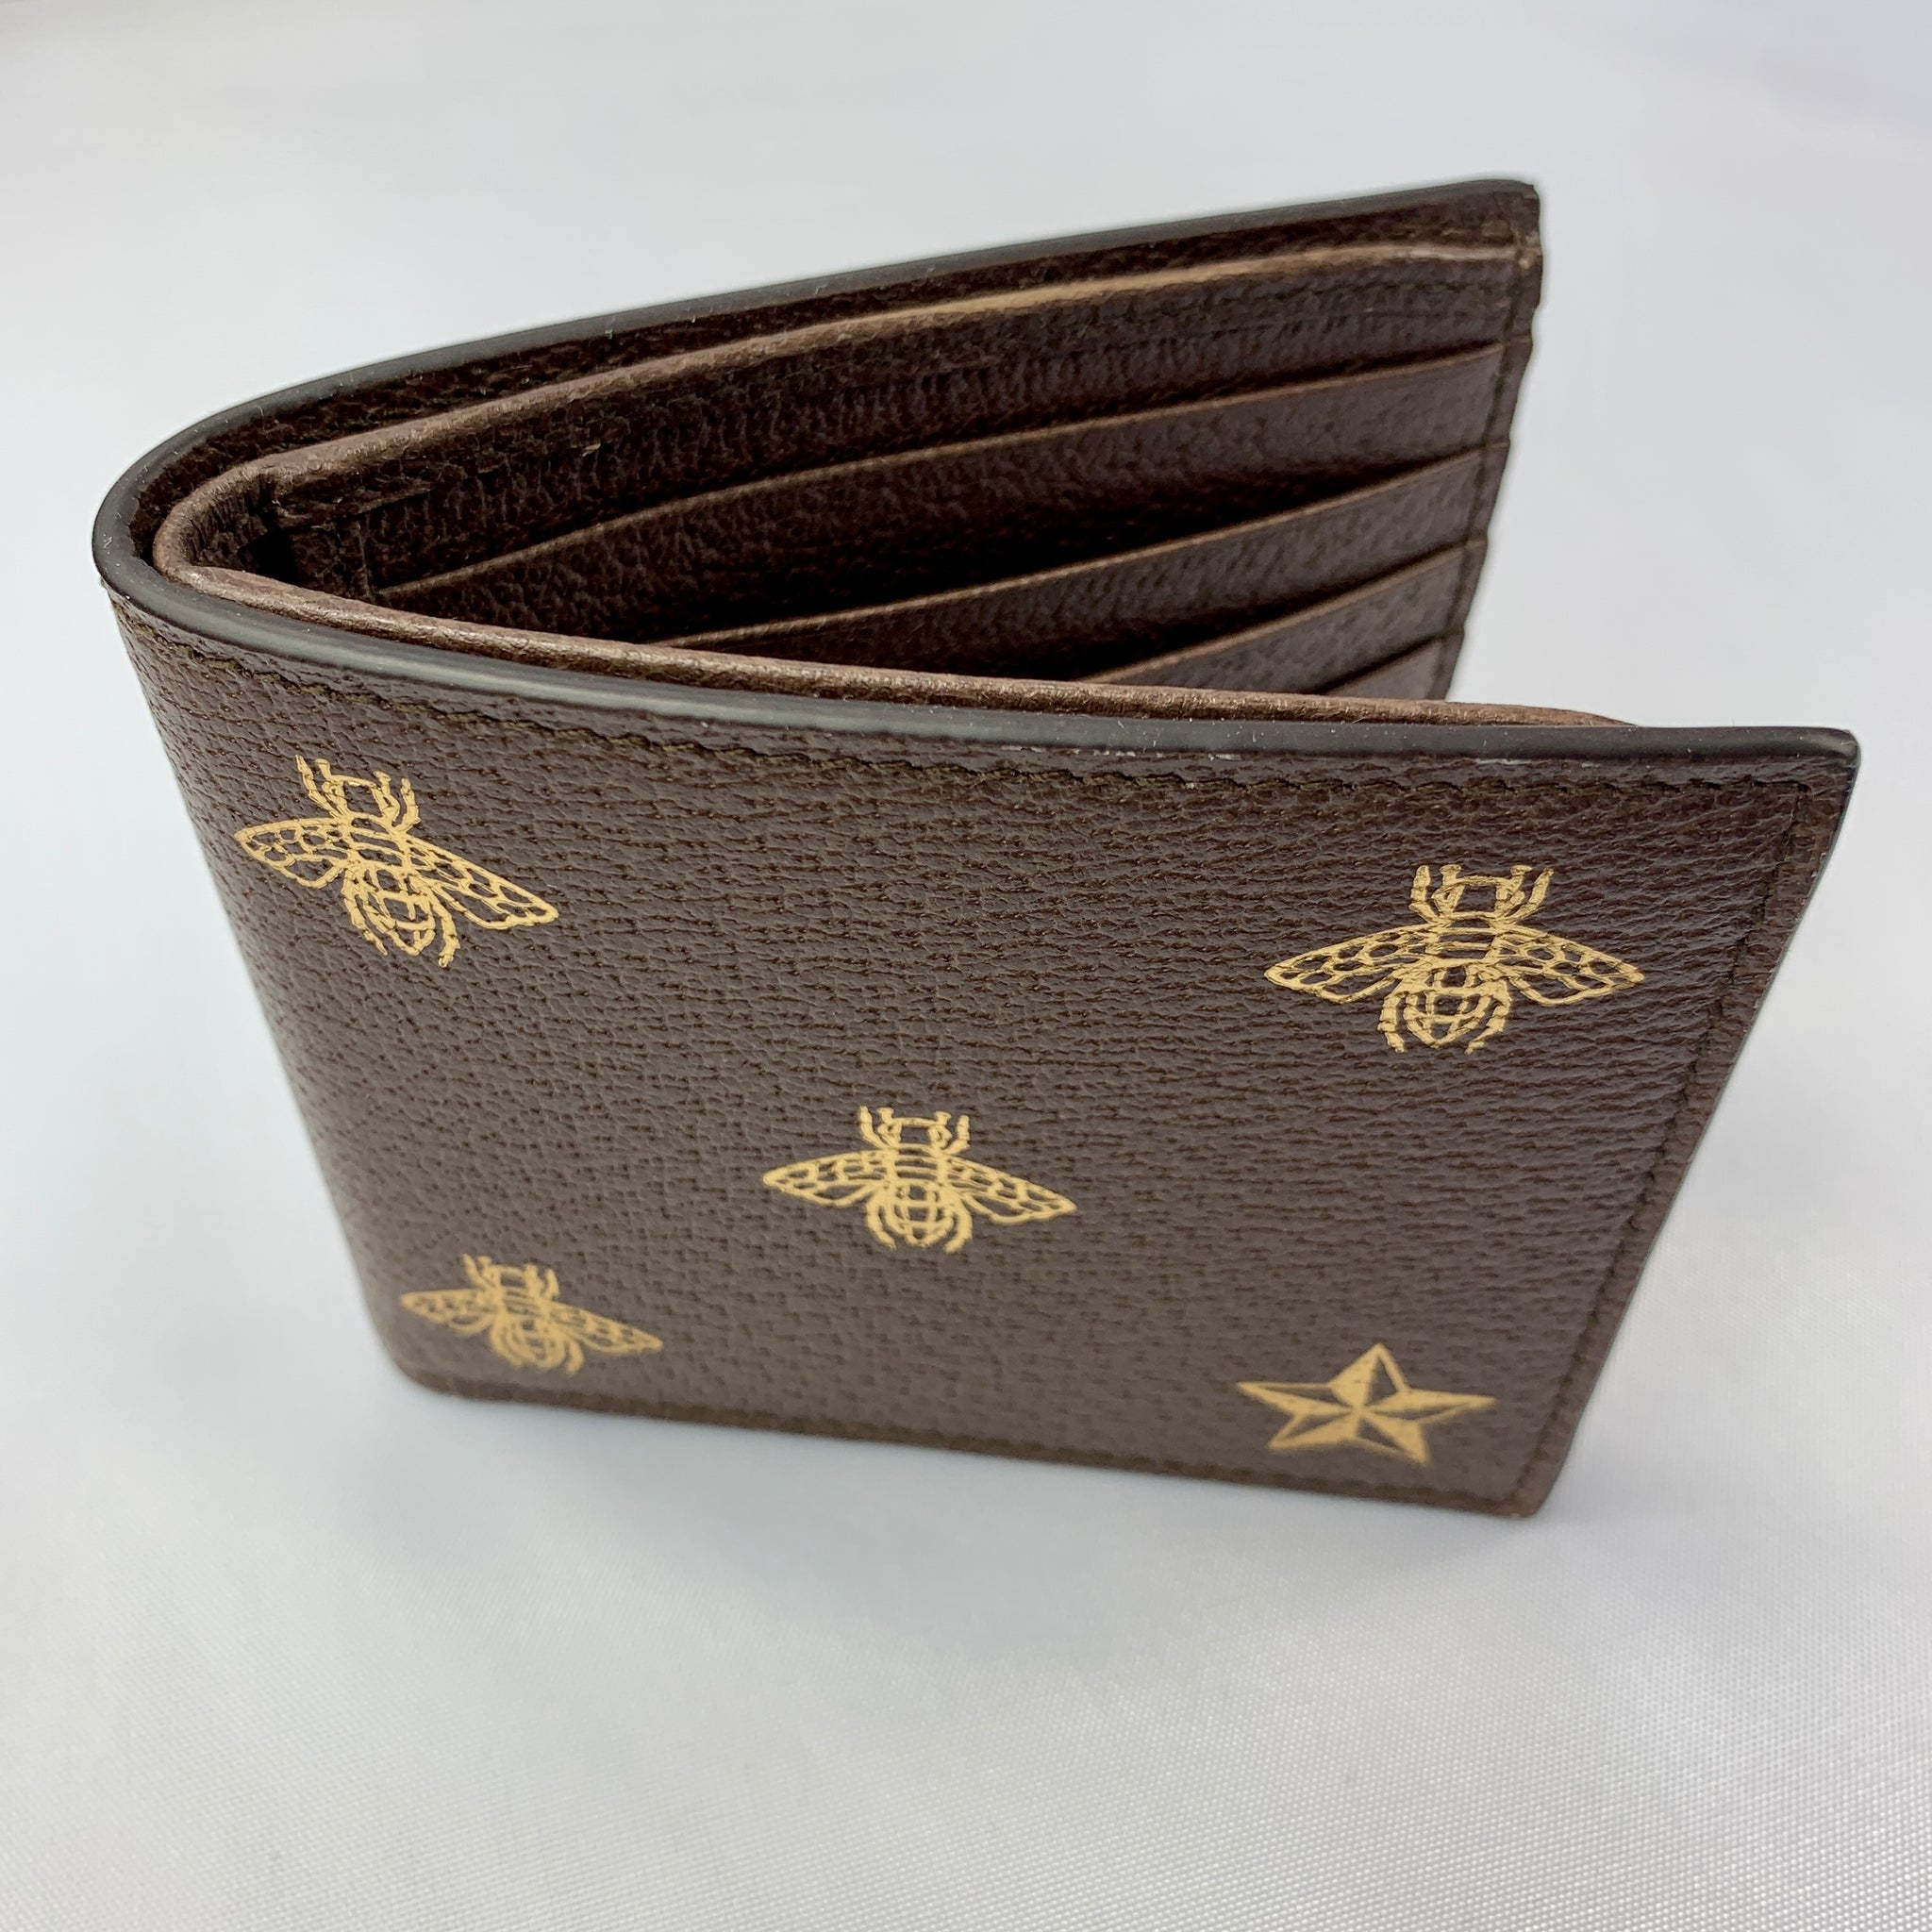 Gucci Bifold Wallet Bee Star Brown/Gold in Leather - GB